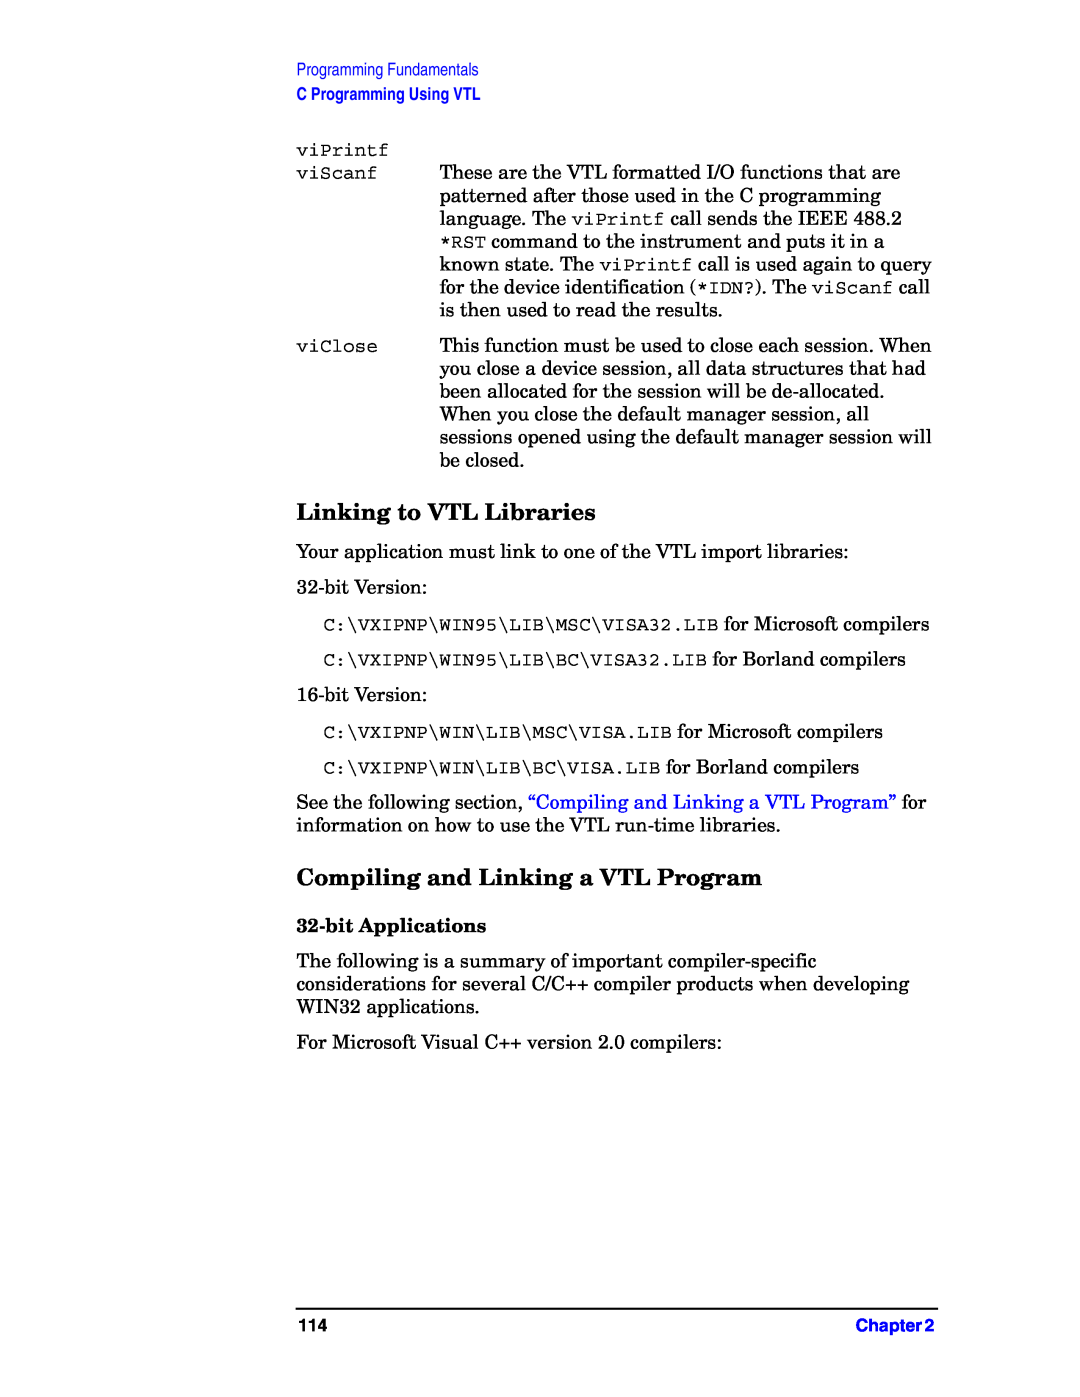 Agilent Technologies E4406A VSA manual Linking to VTL Libraries, Compiling and Linking a VTL Program, bitApplications 